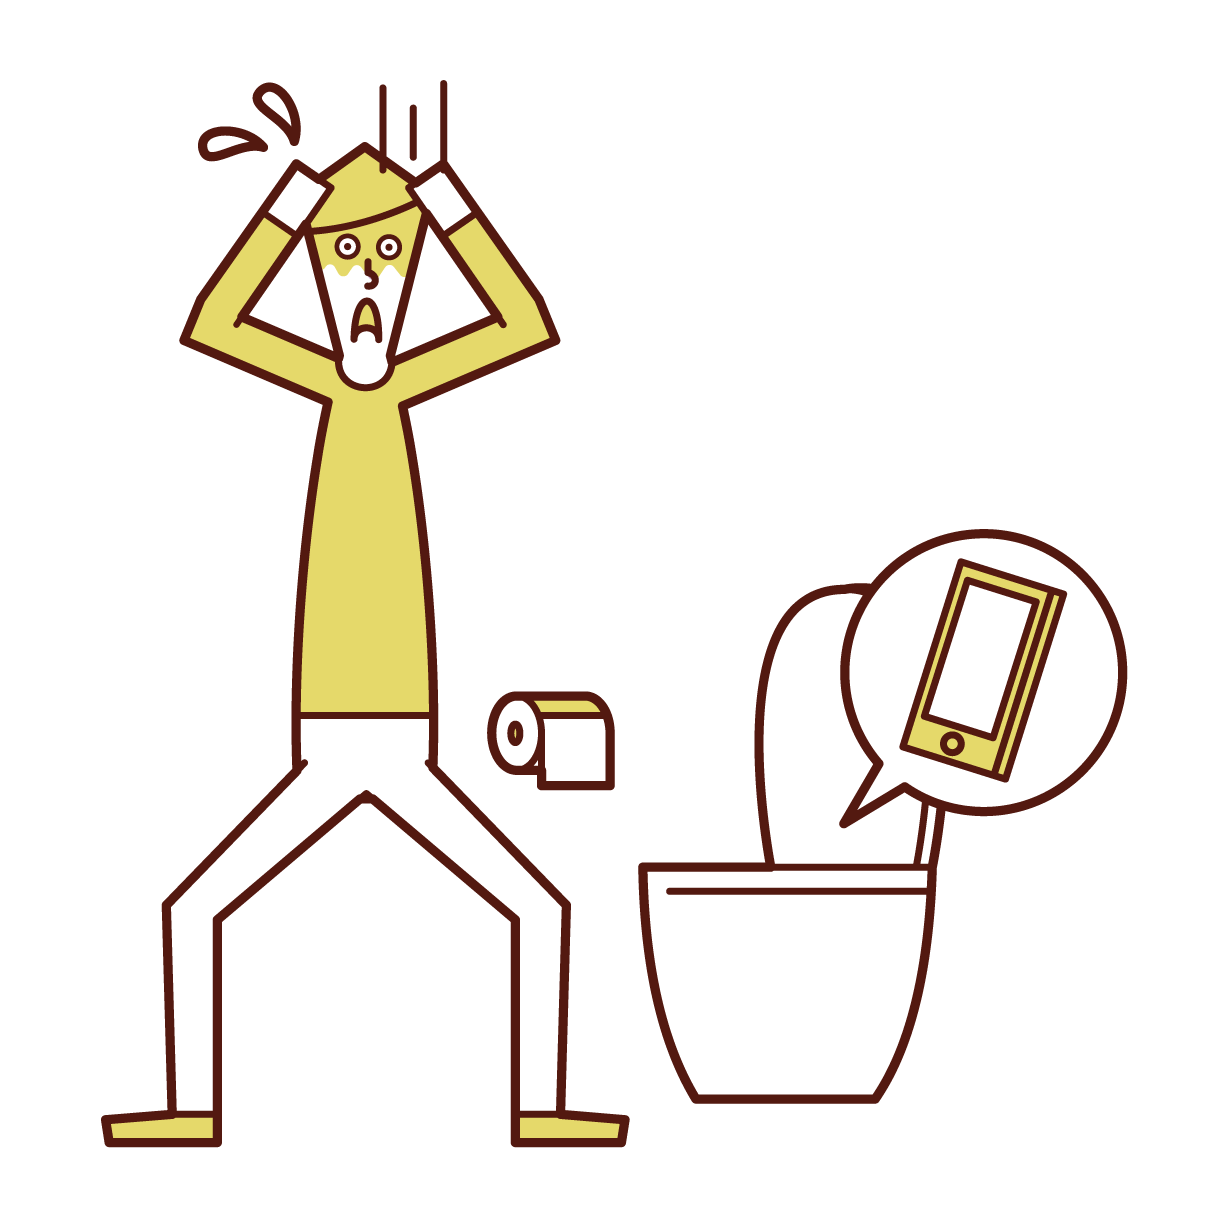 Illustration of a man dropping his smartphone on a toilet bowl